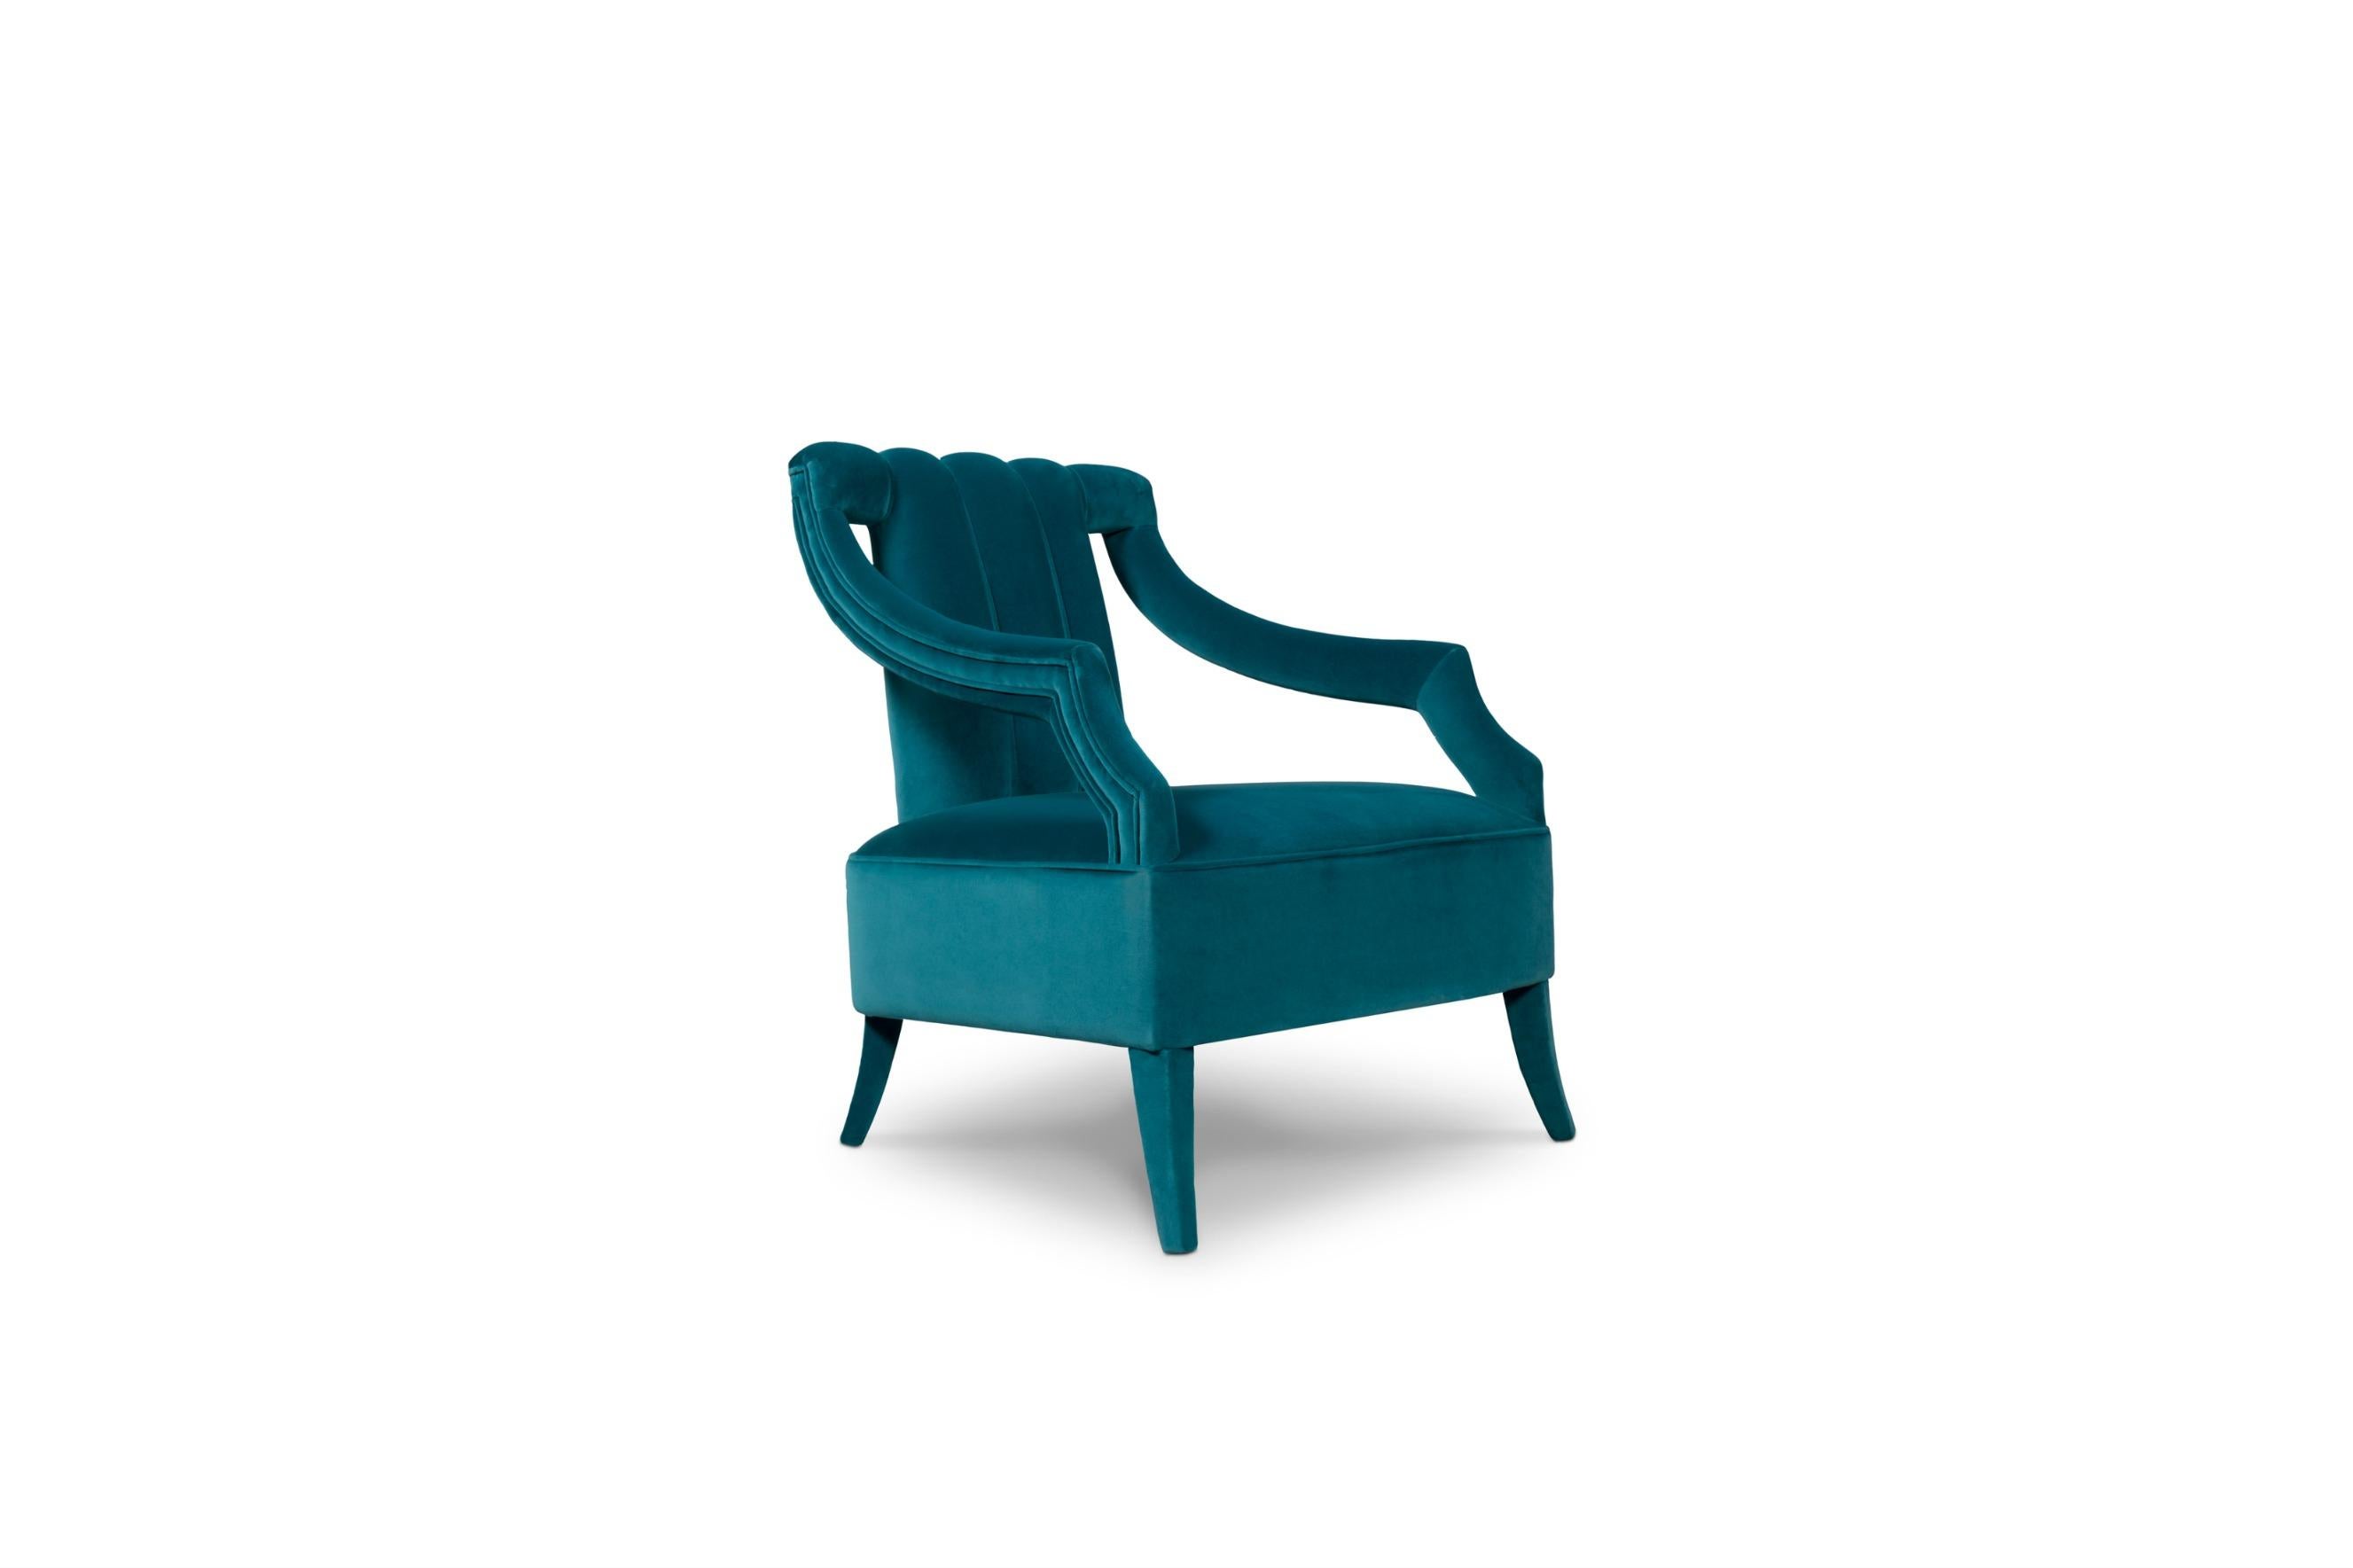 The Tunisian Cayo Island is a nature’s wonder with beautiful landscapes and an impressive green sea. This beauty inspired the creation of Cayo velvet armchair, a fully upholstered chair that breathes elegance. Use this accent chair in a modern